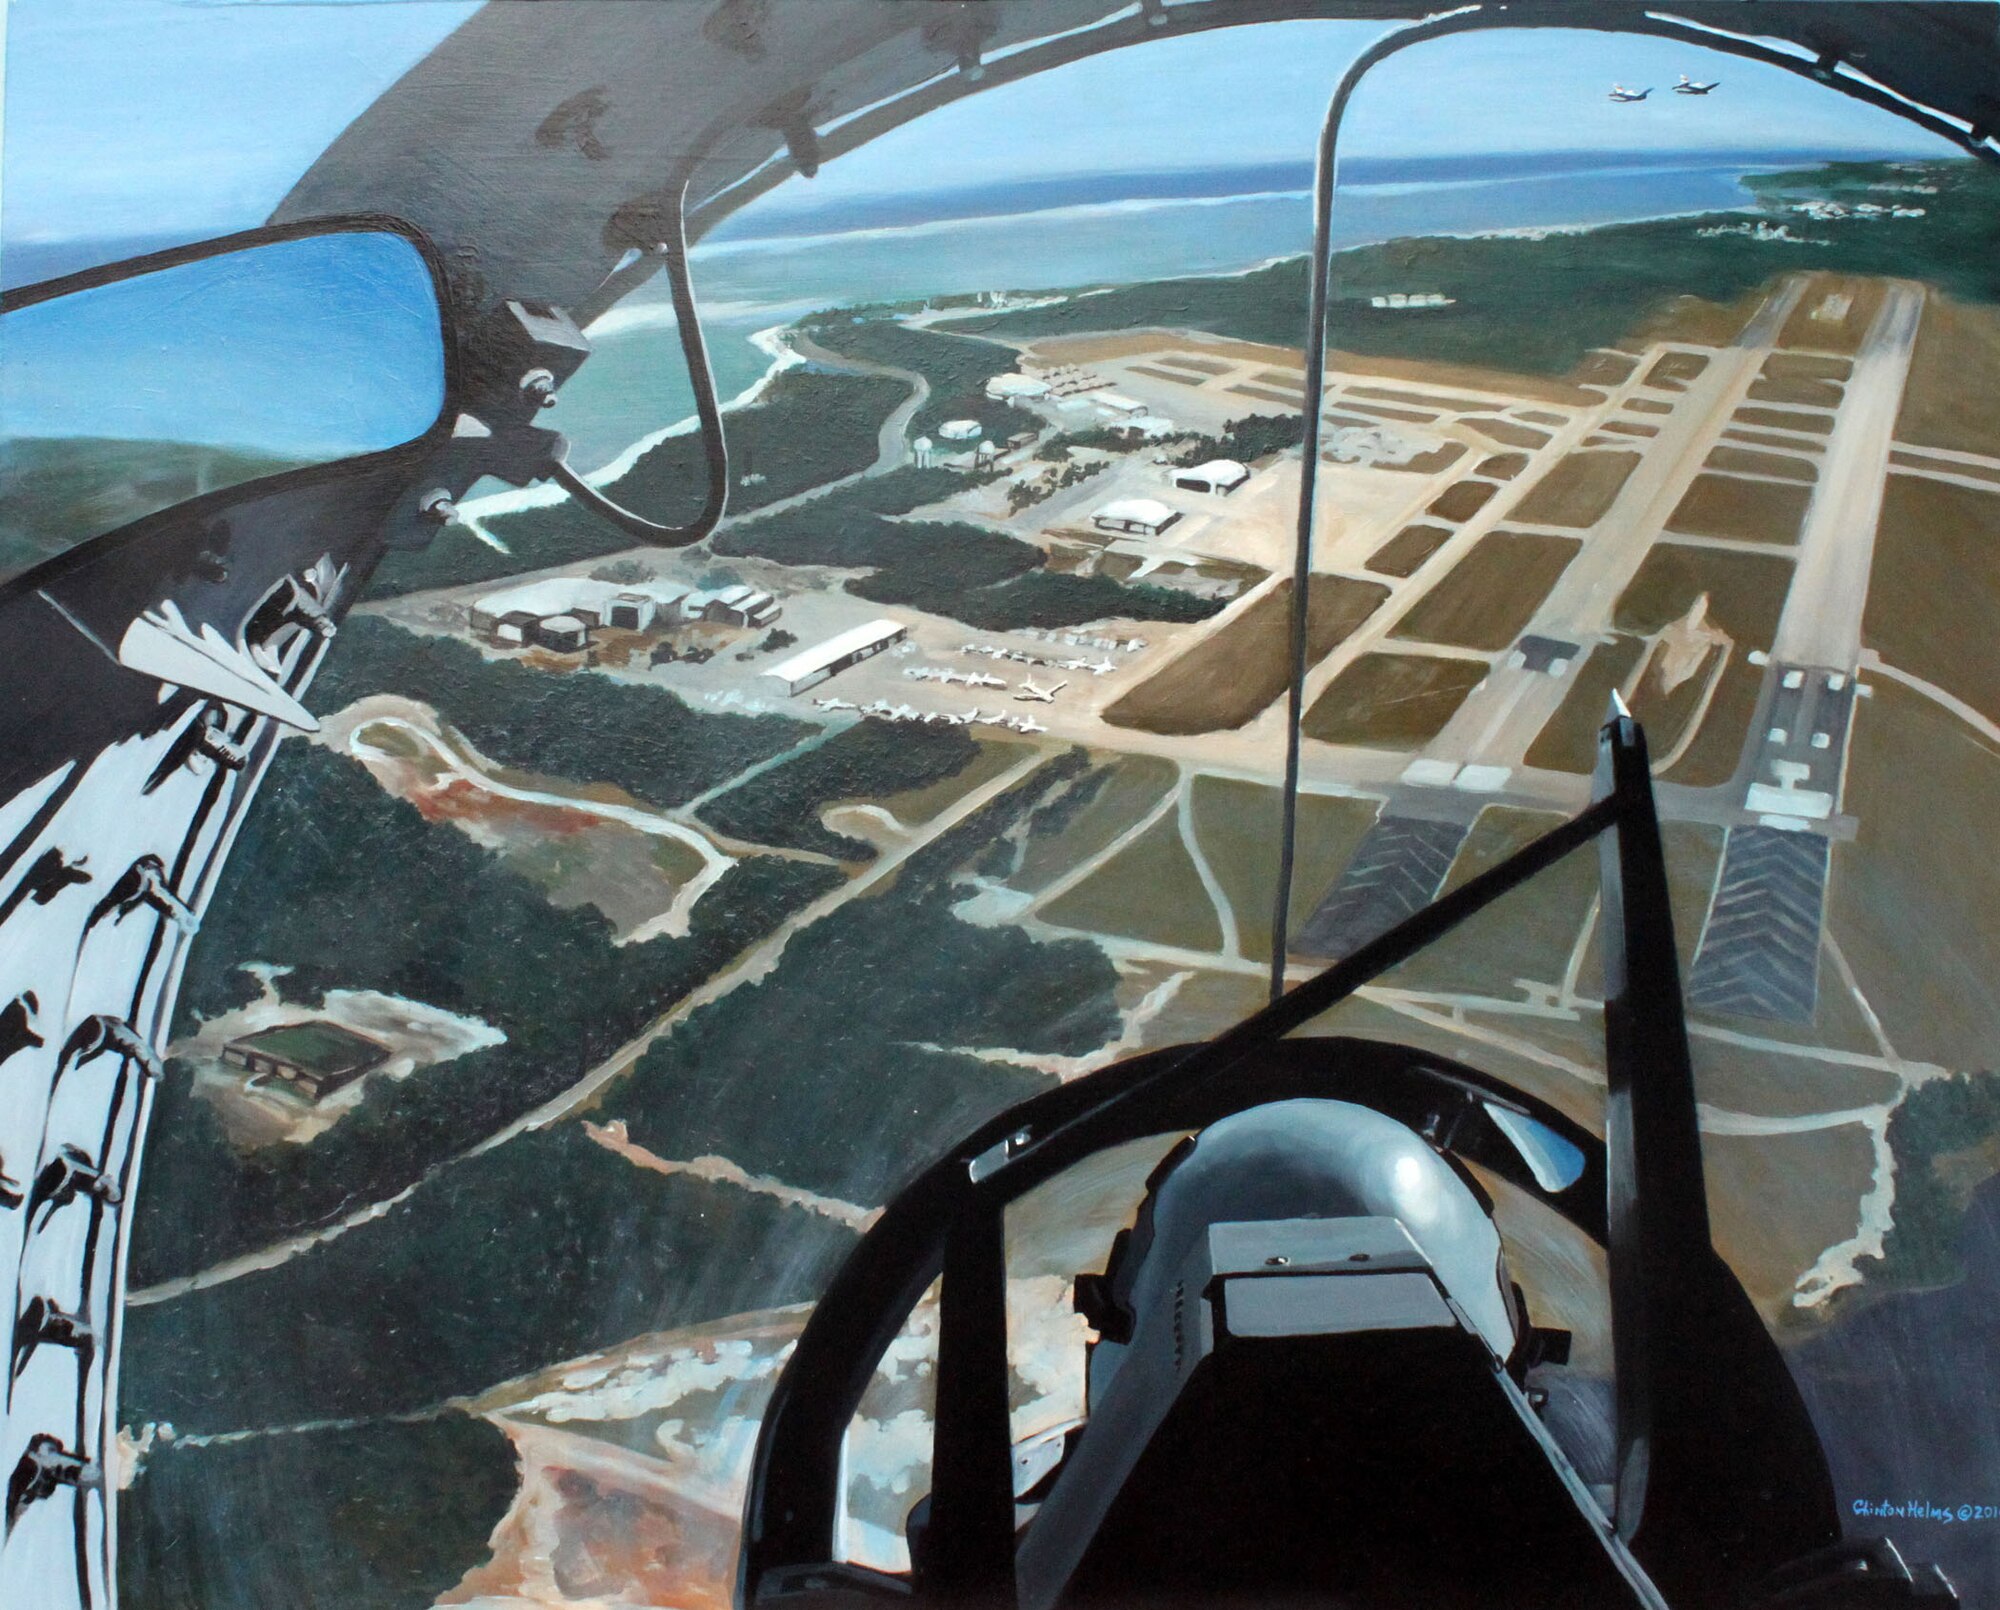 This image, an original work by Clinton Helm's, Air Force Art Program volunteer, is a painting displaying the inside of the T-6 trainer at the Naval Air Station at Pensacola, Fla. (Courtesy photo by Clinton Helms) 